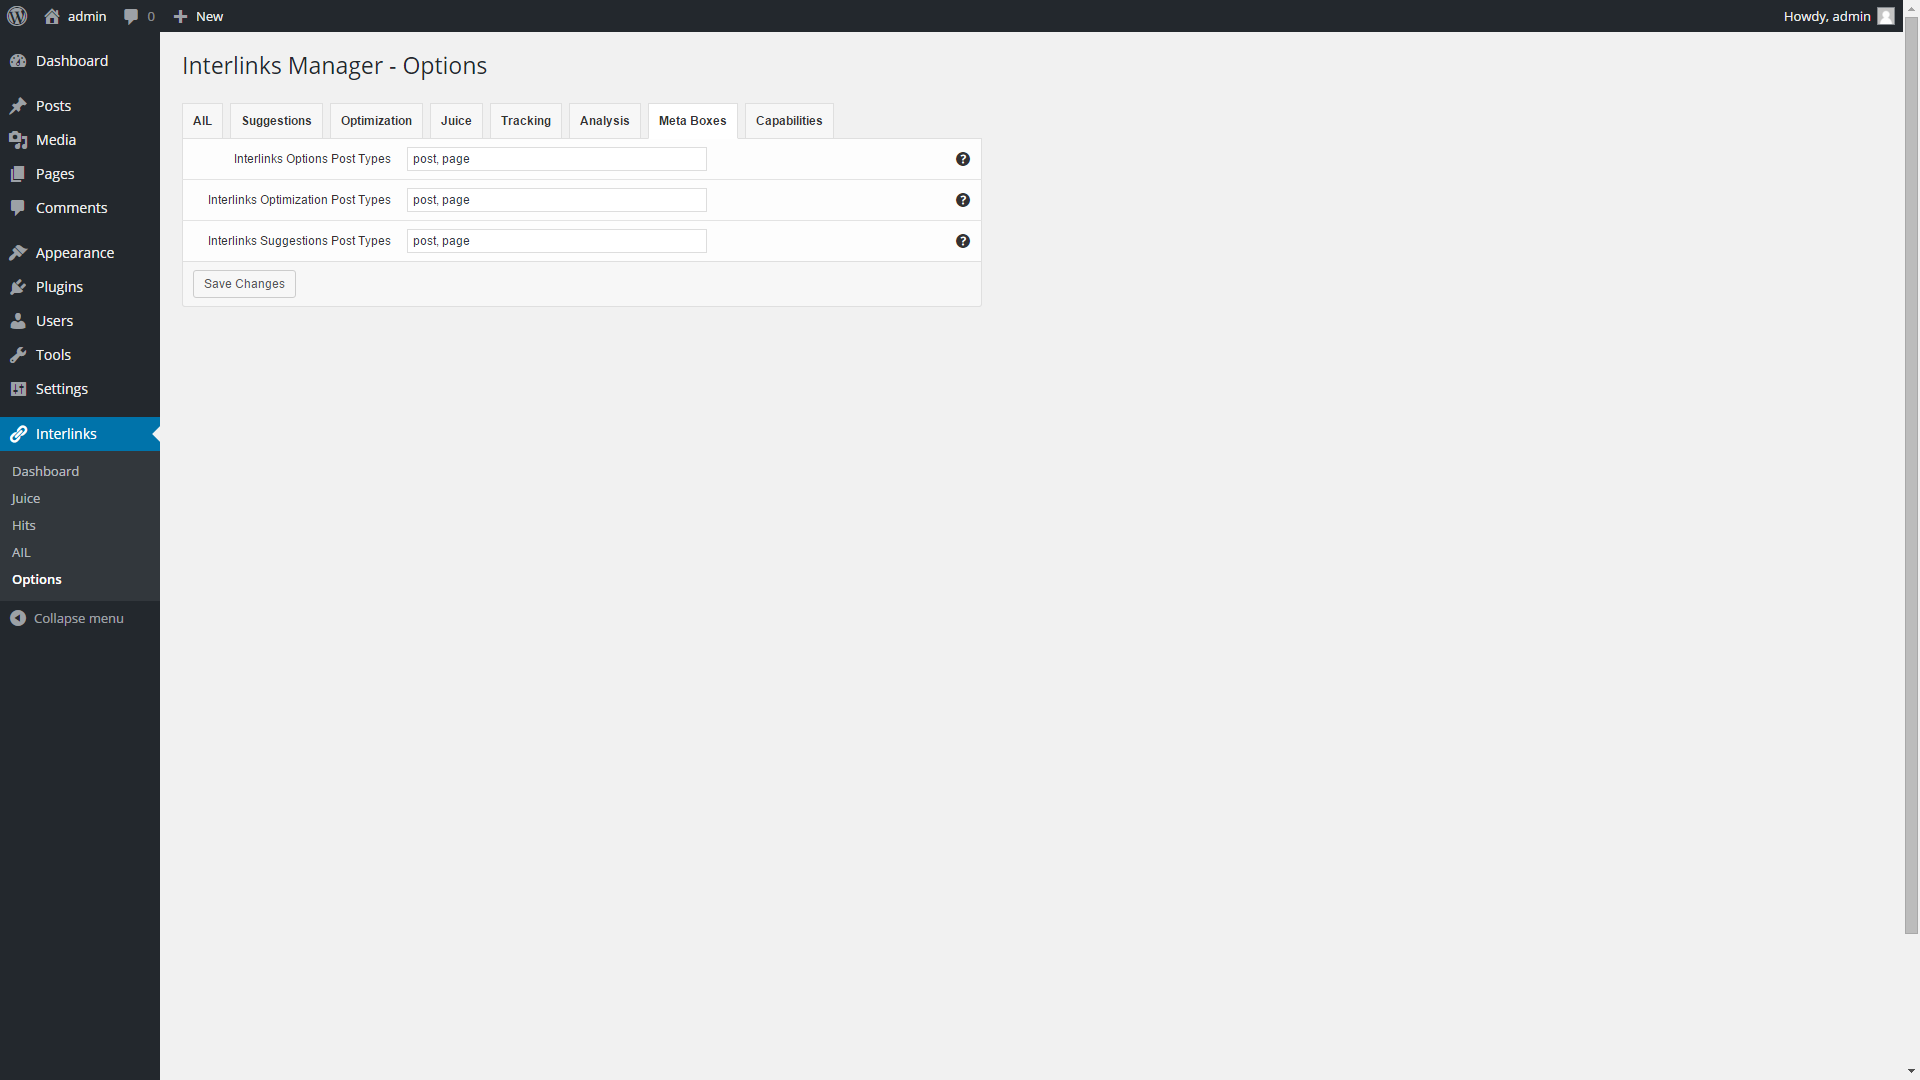 "Meta Boxes" tab in the plugin options of the Interlinks Manager plugin for WordPress.